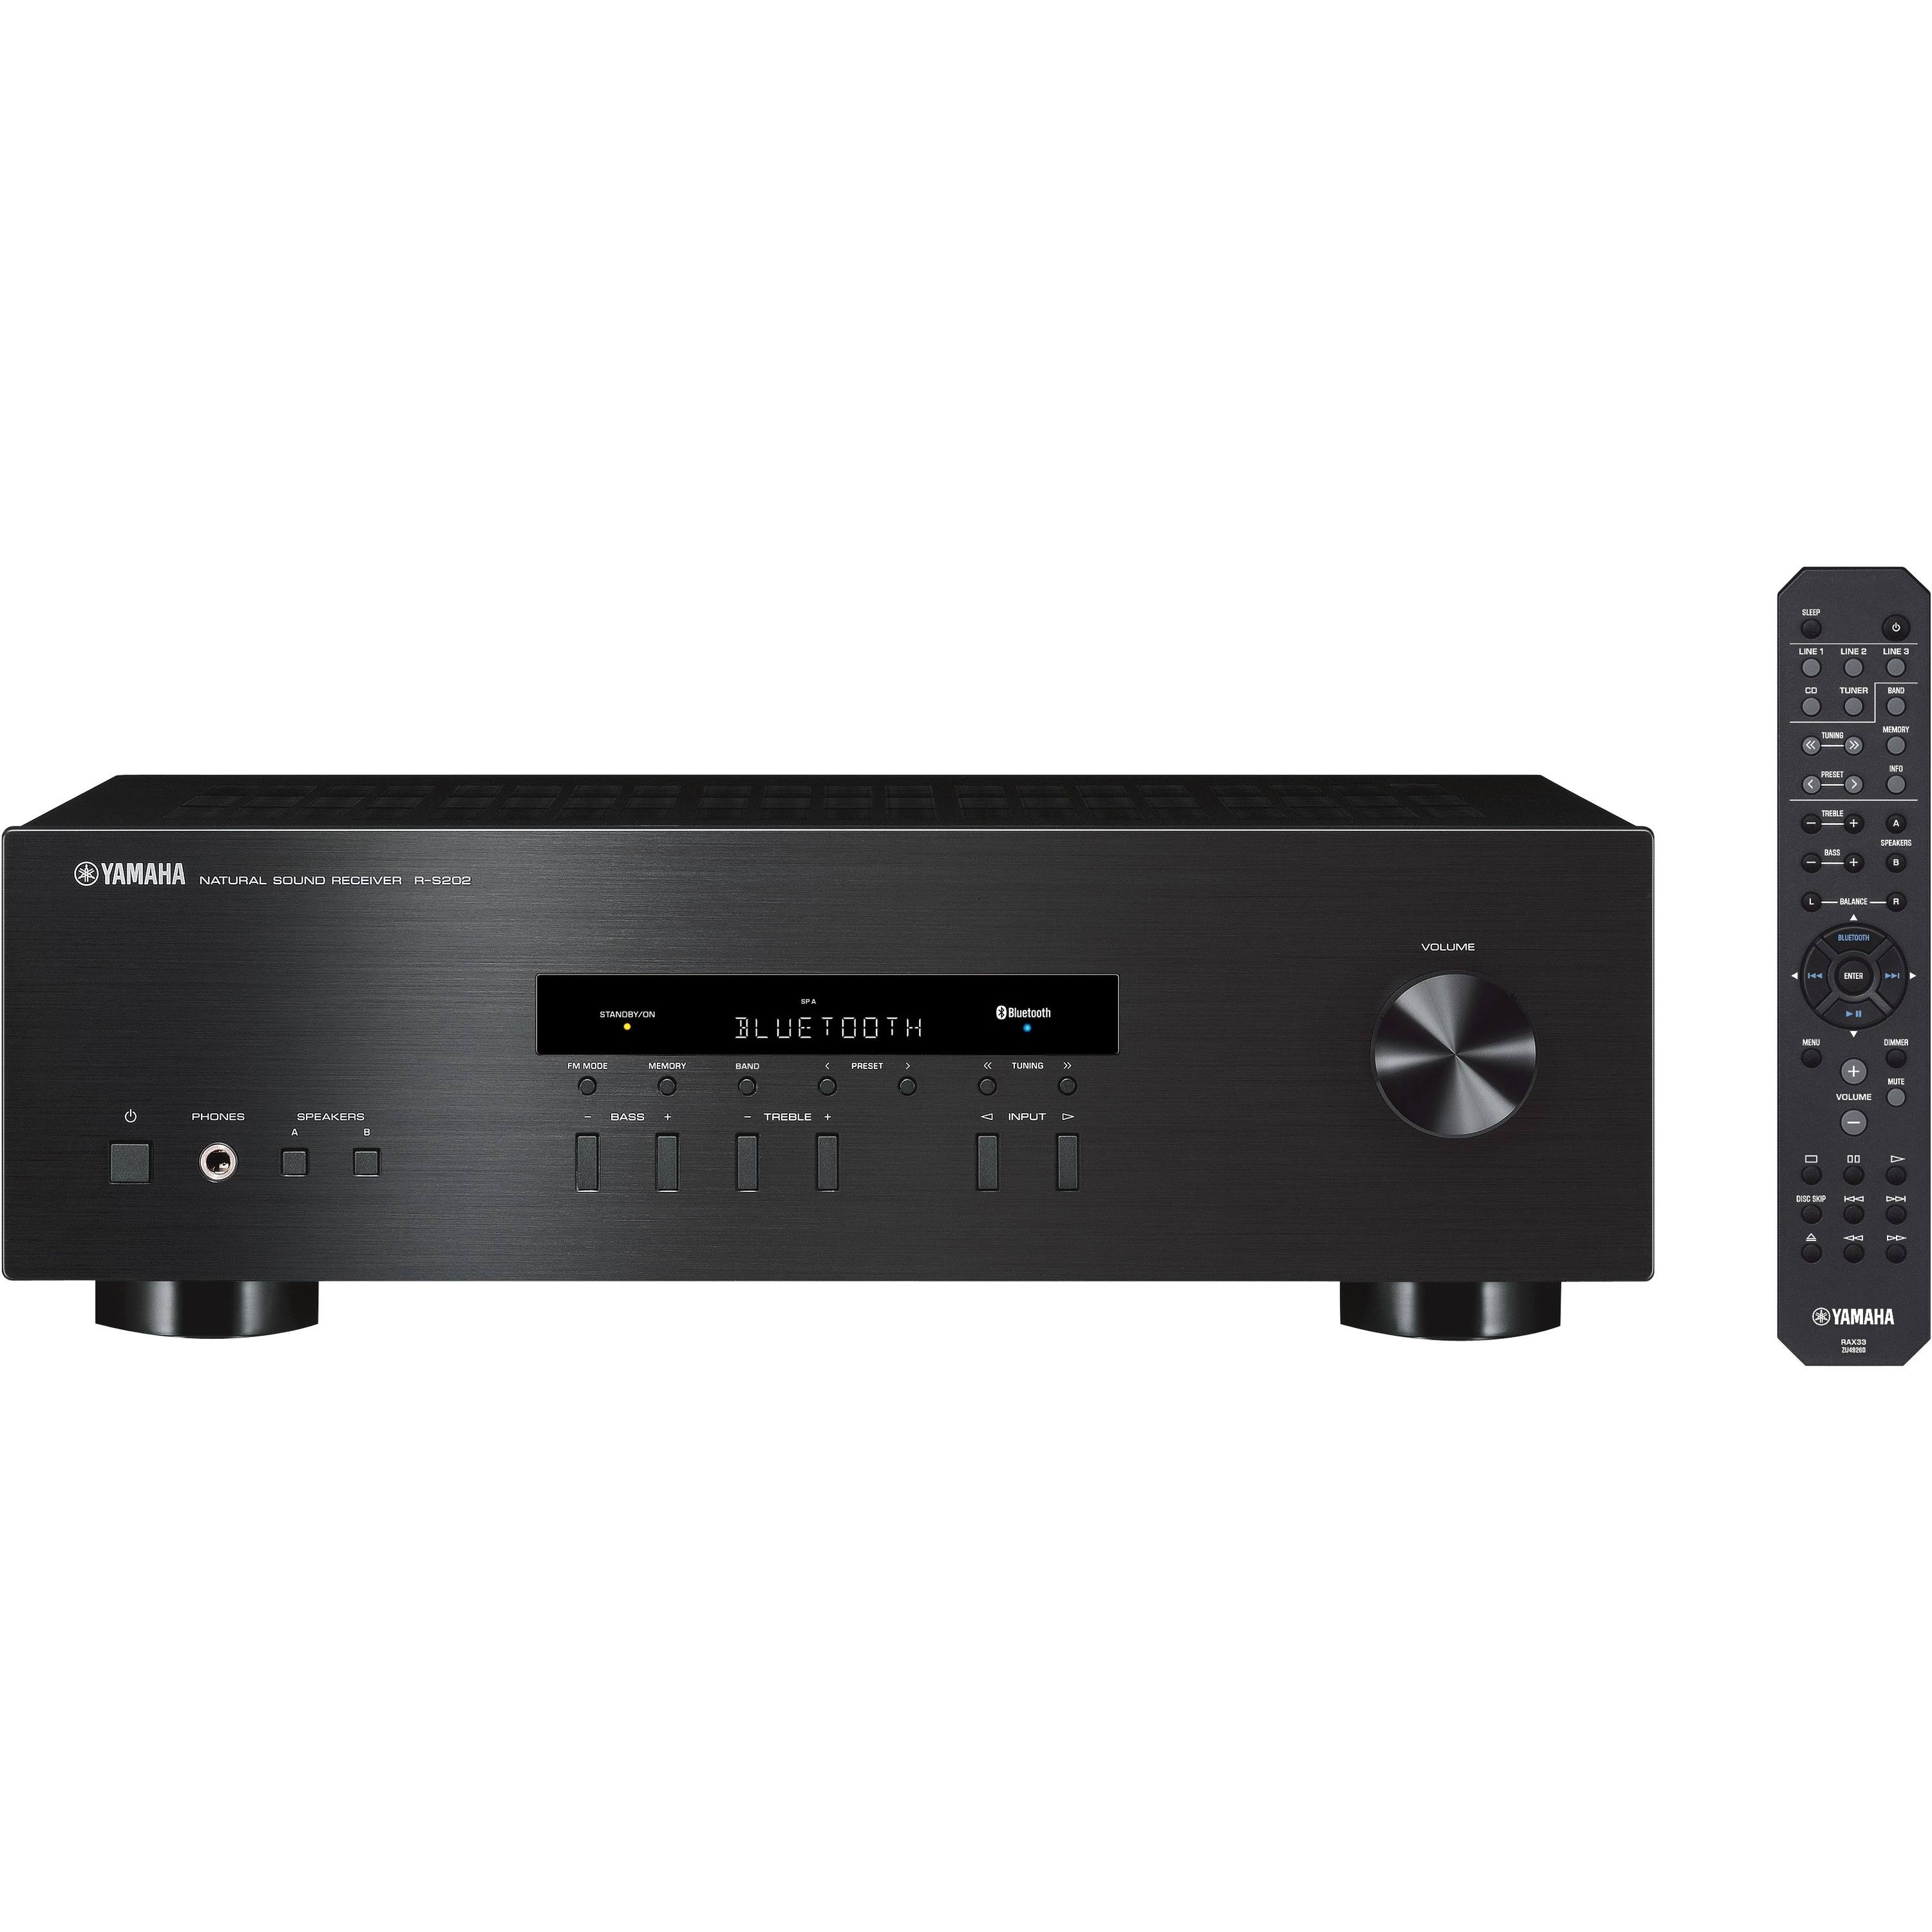 Yamaha R-s202 Stereo Receiver